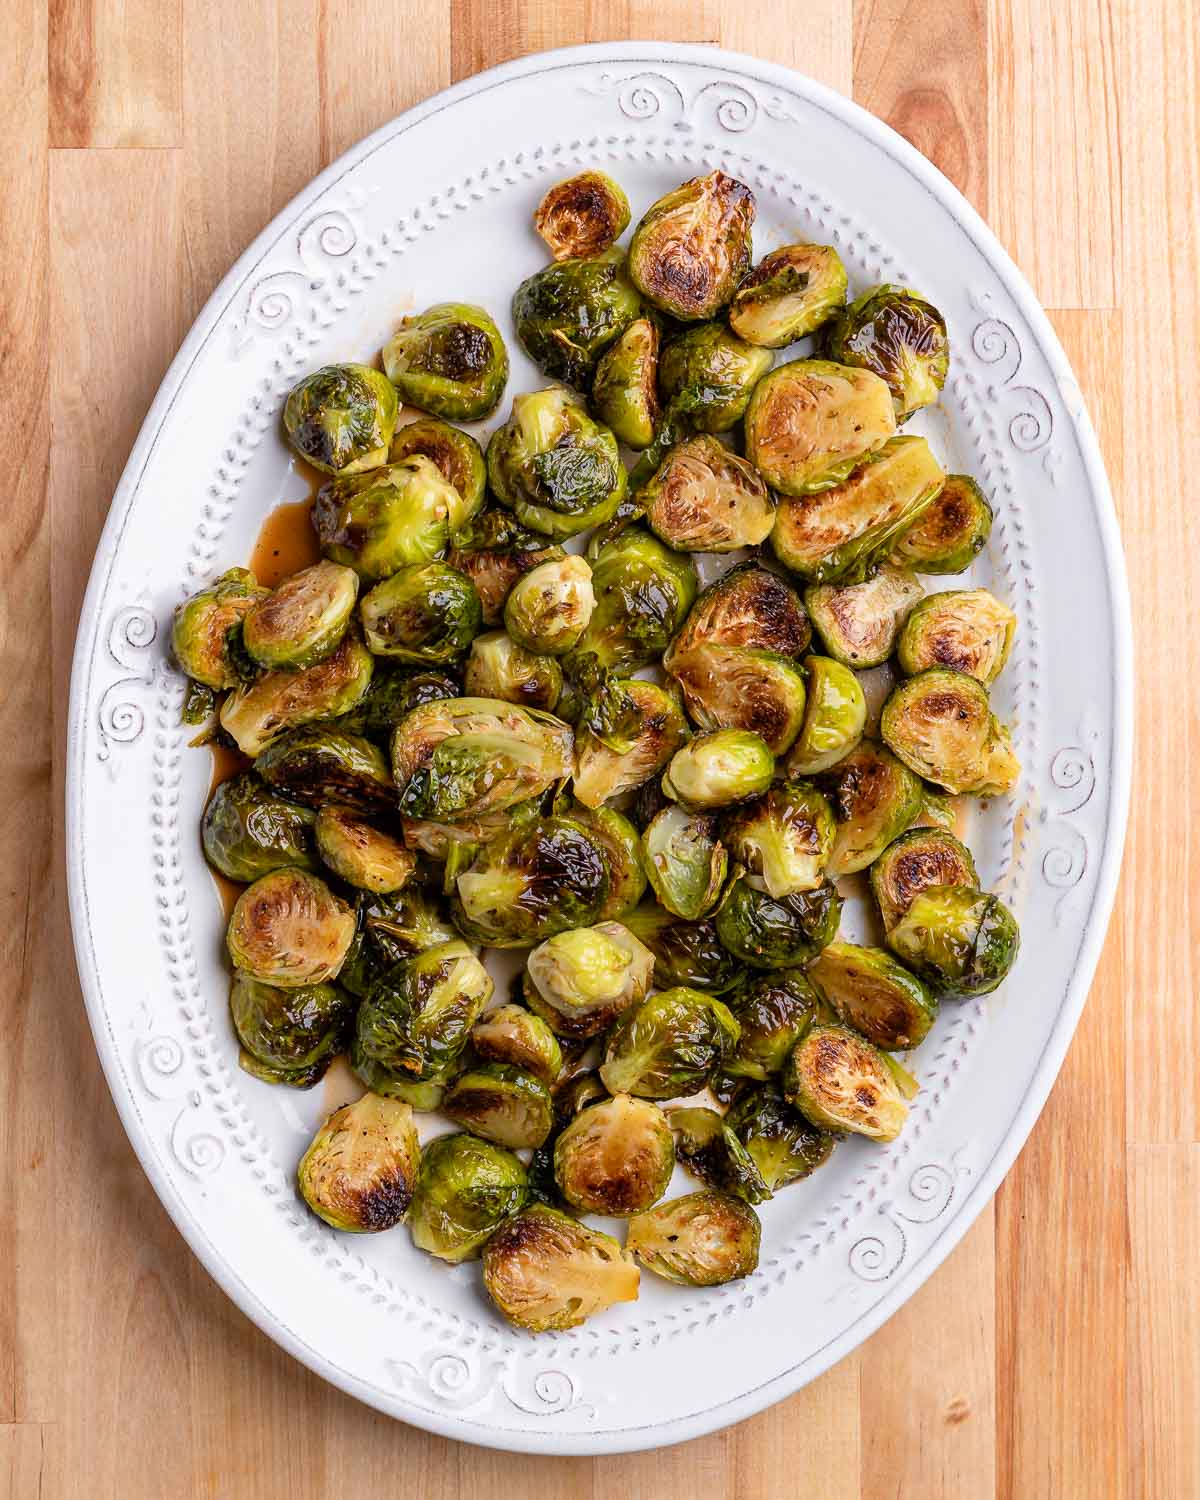 Roasted brussels sprouts in oval white plate on table.